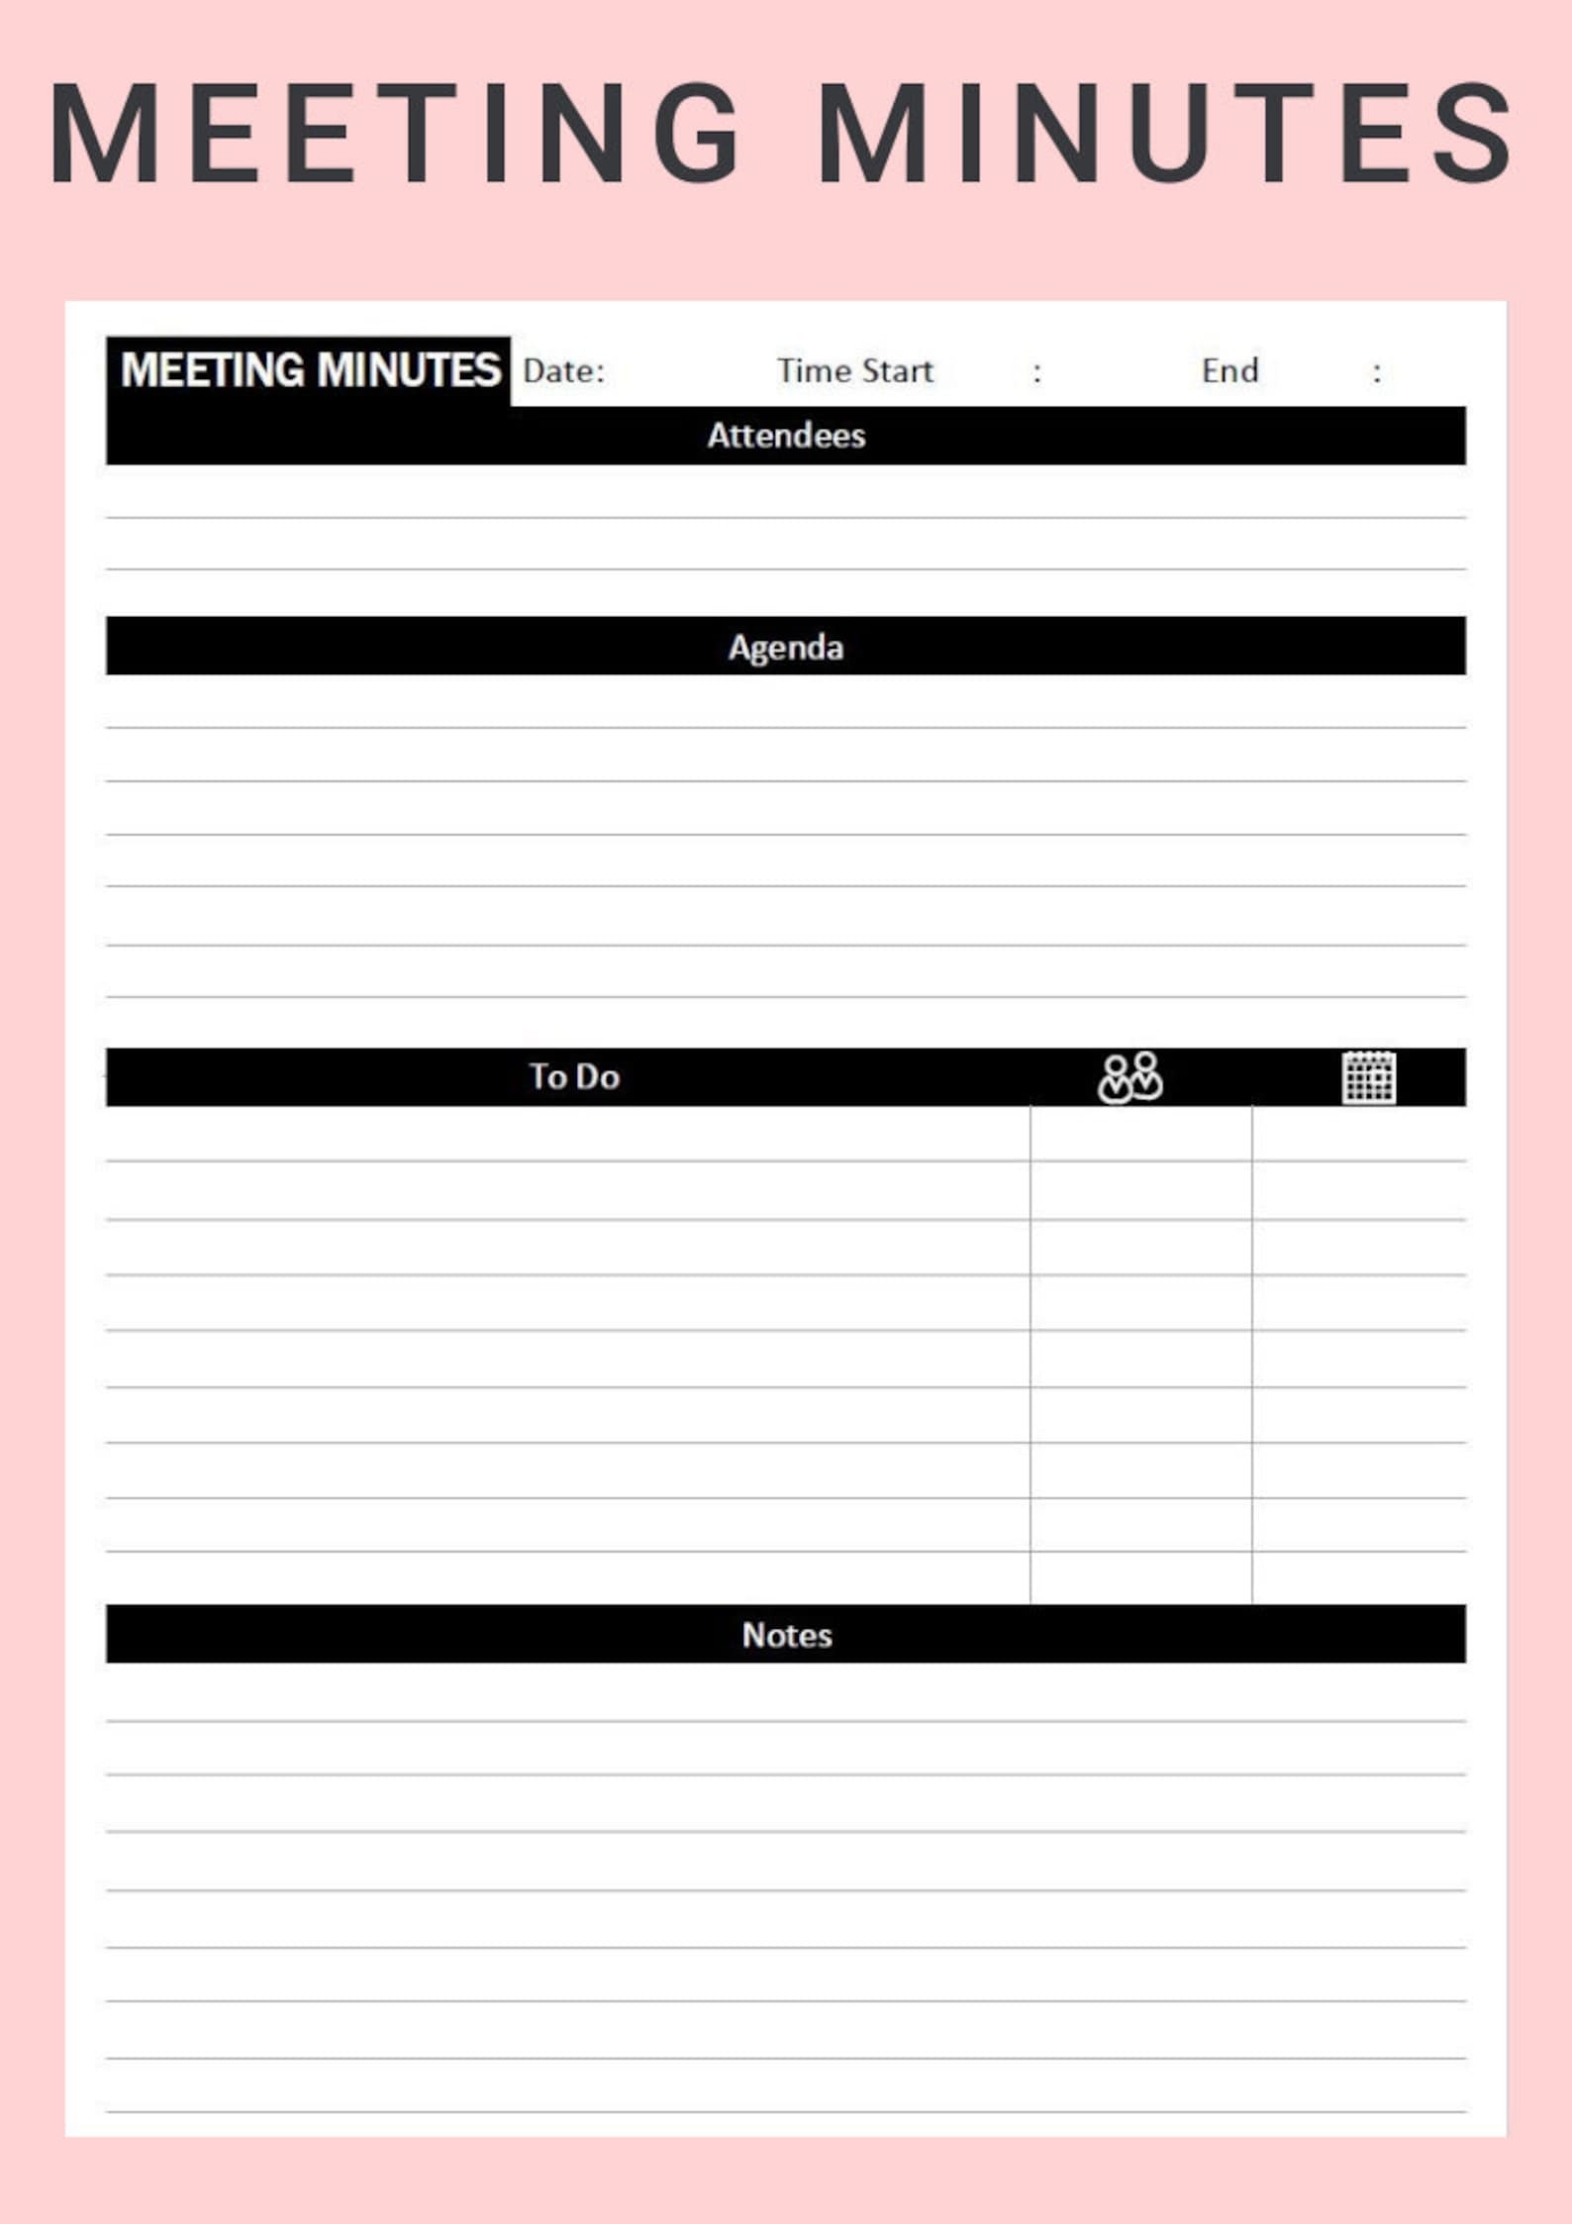 Business Meeting Agenda Template Standard Meeting Minutes And | Etsy intended for Templates For Minutes Of Meetings And Agendas